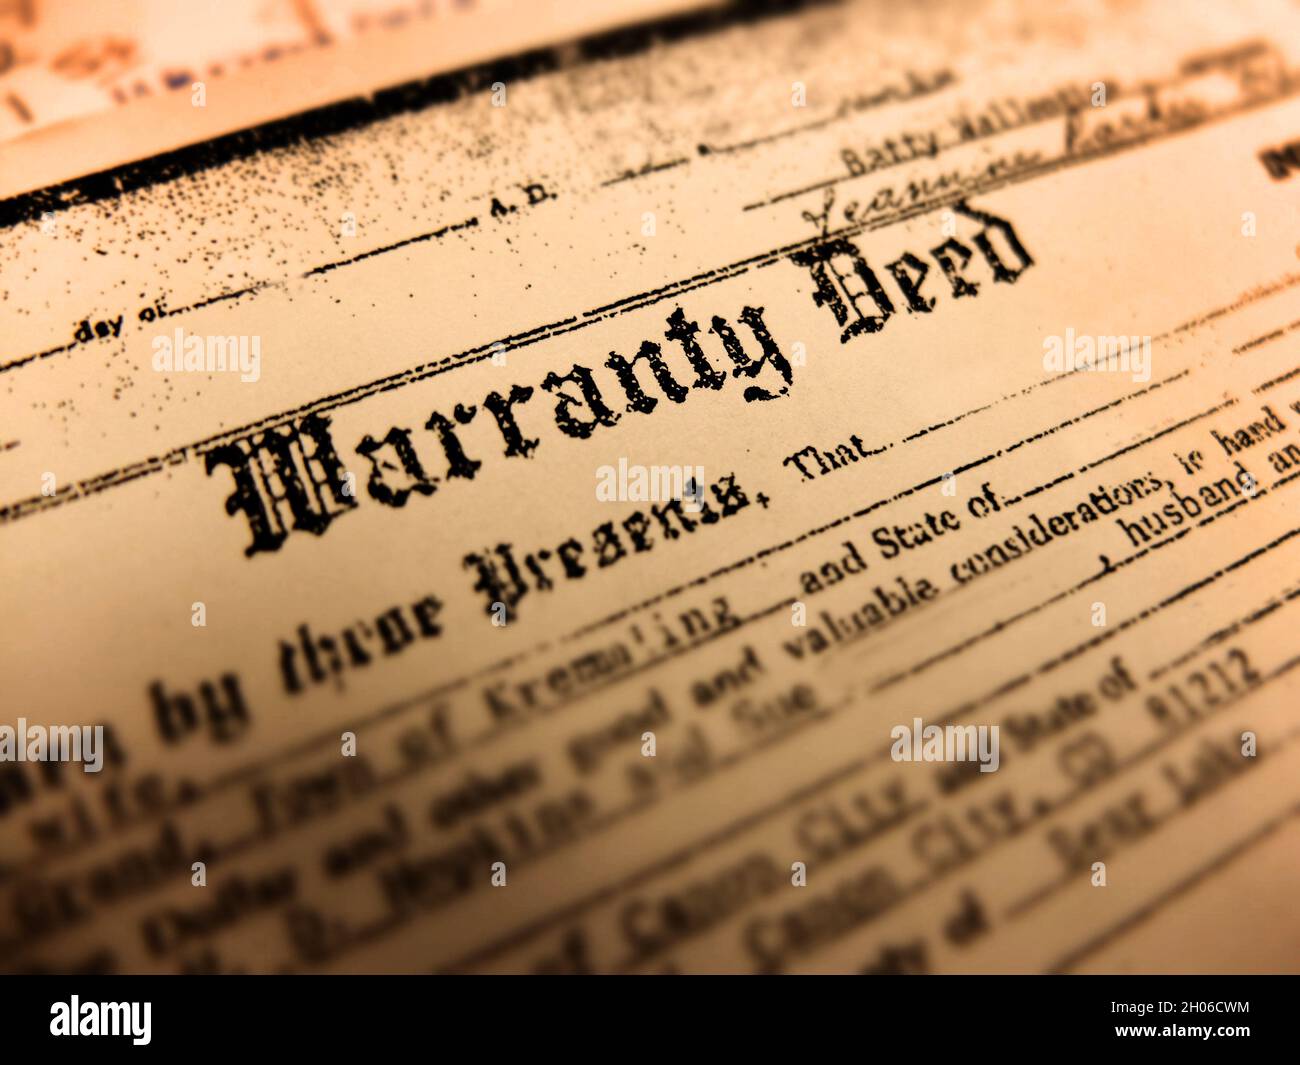 Old warranty deed transfer title to land real property home legal document Stock Photo